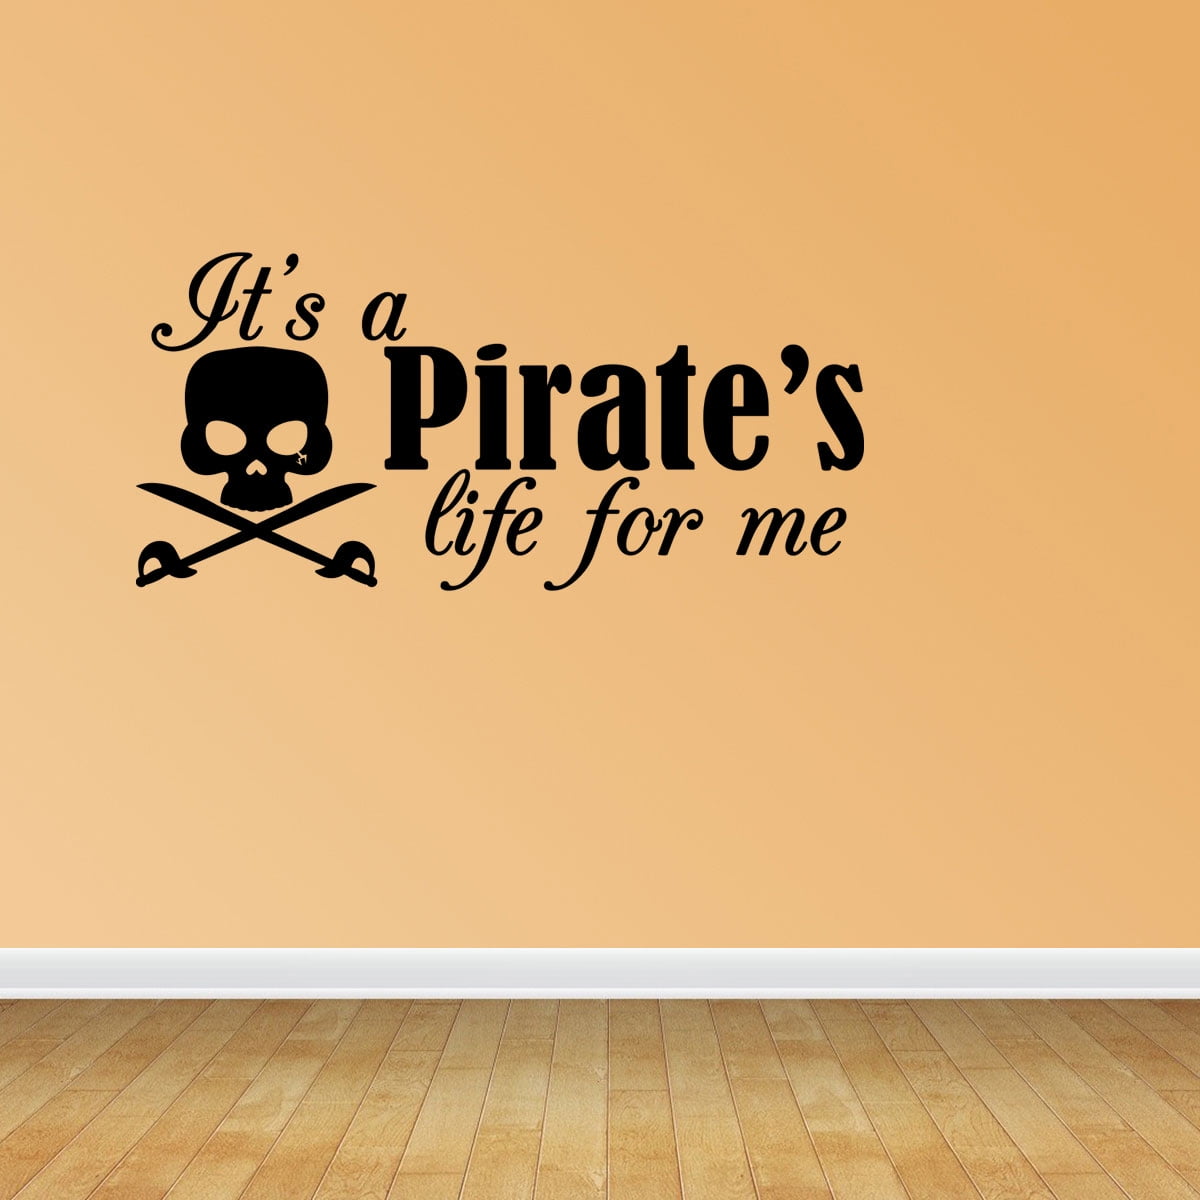 LARGE QUOTE PIRATES LIFE FOR ME WALL STICKER GRAPHIC DECAL MATT VINYL BEDROOM 